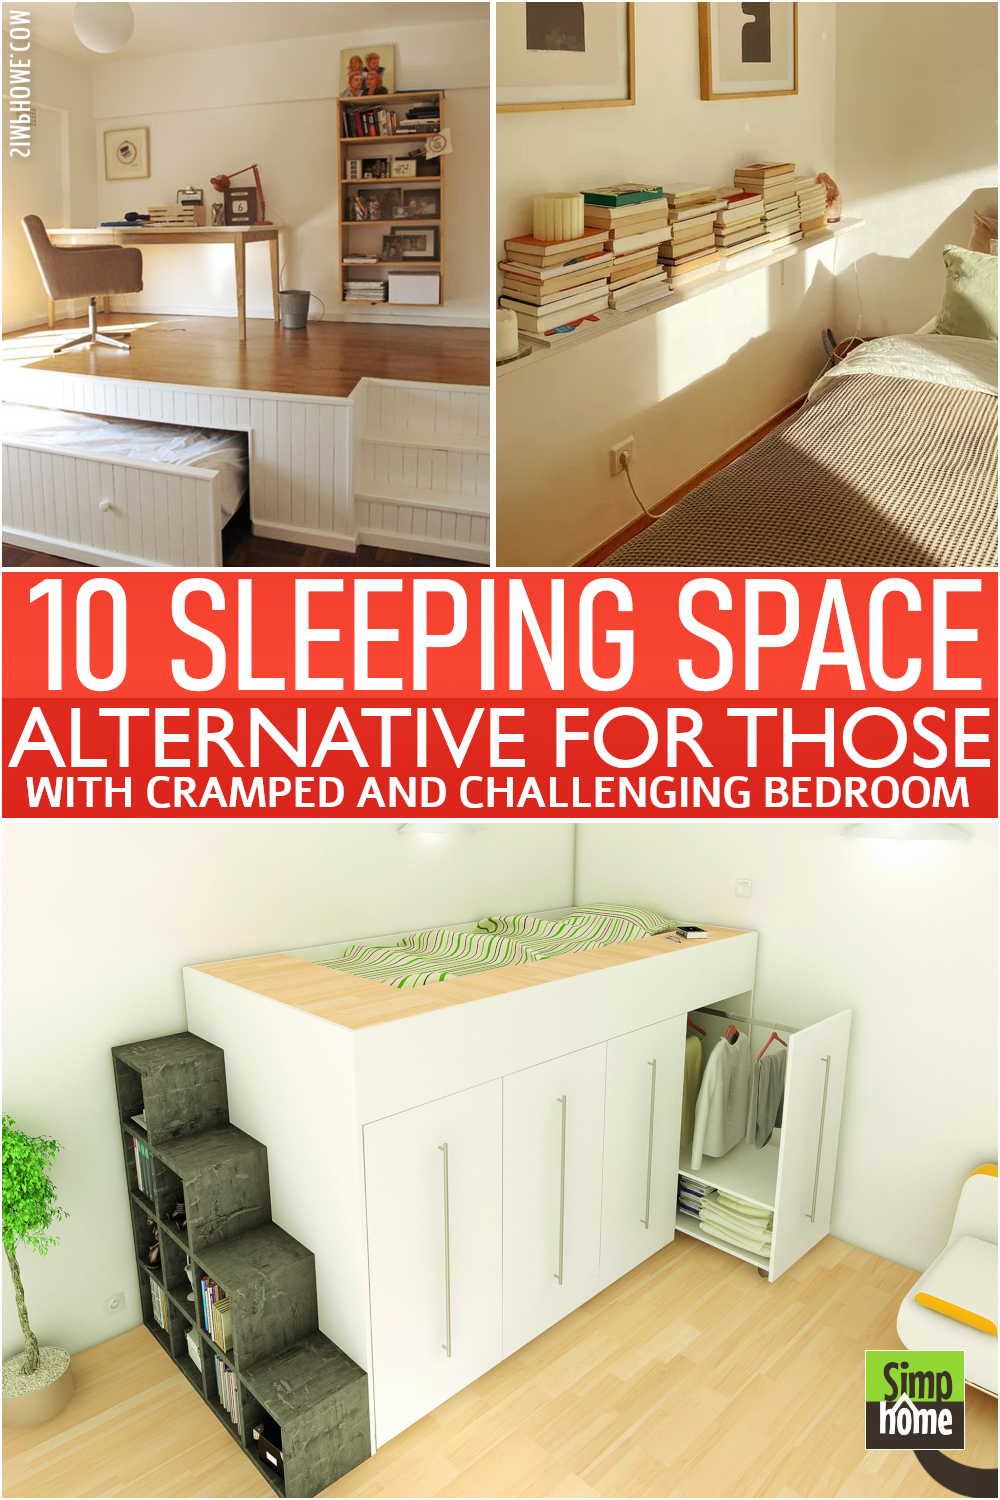 This is 10 Small Sleeping Space Solutions Poster